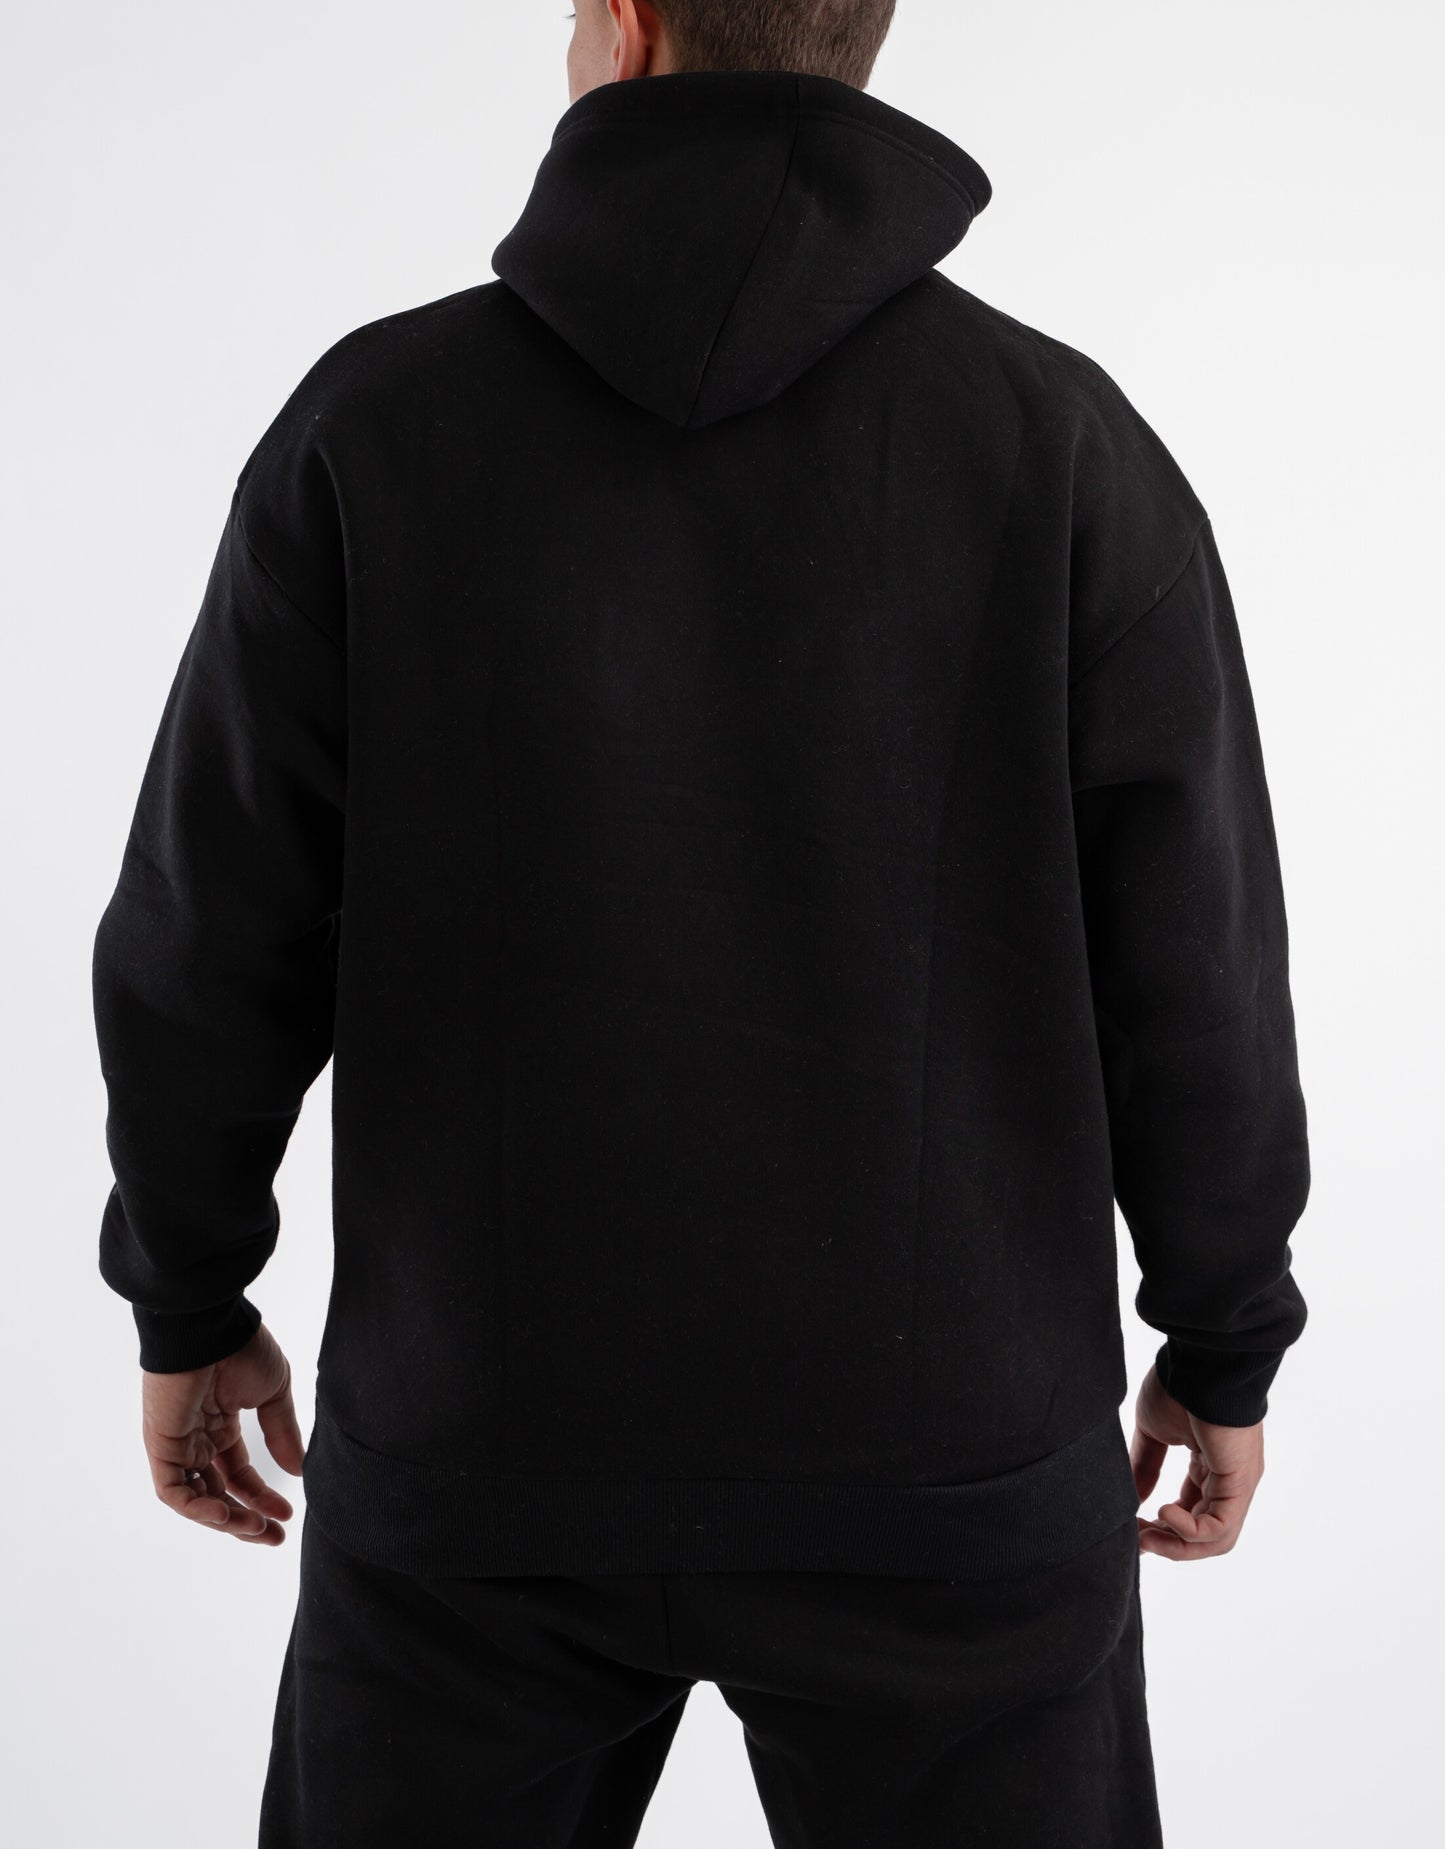 BLACK OVER-SIZED HOODIE